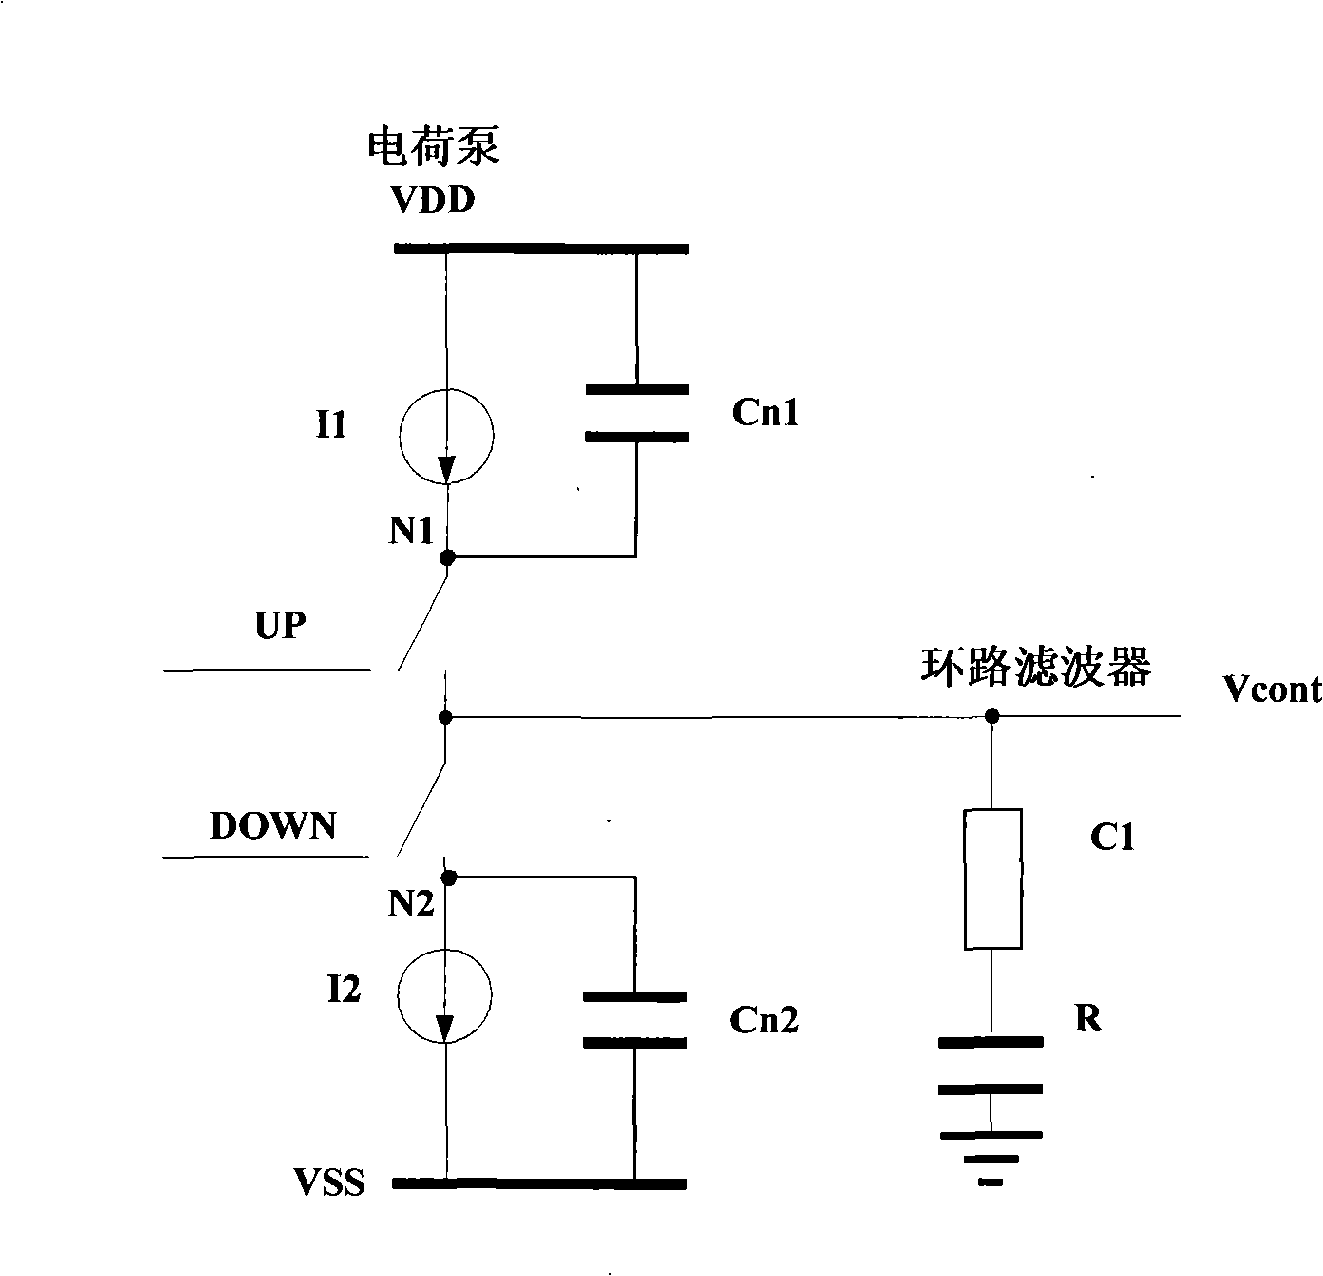 Charge pump construction for phase lock loop circuit